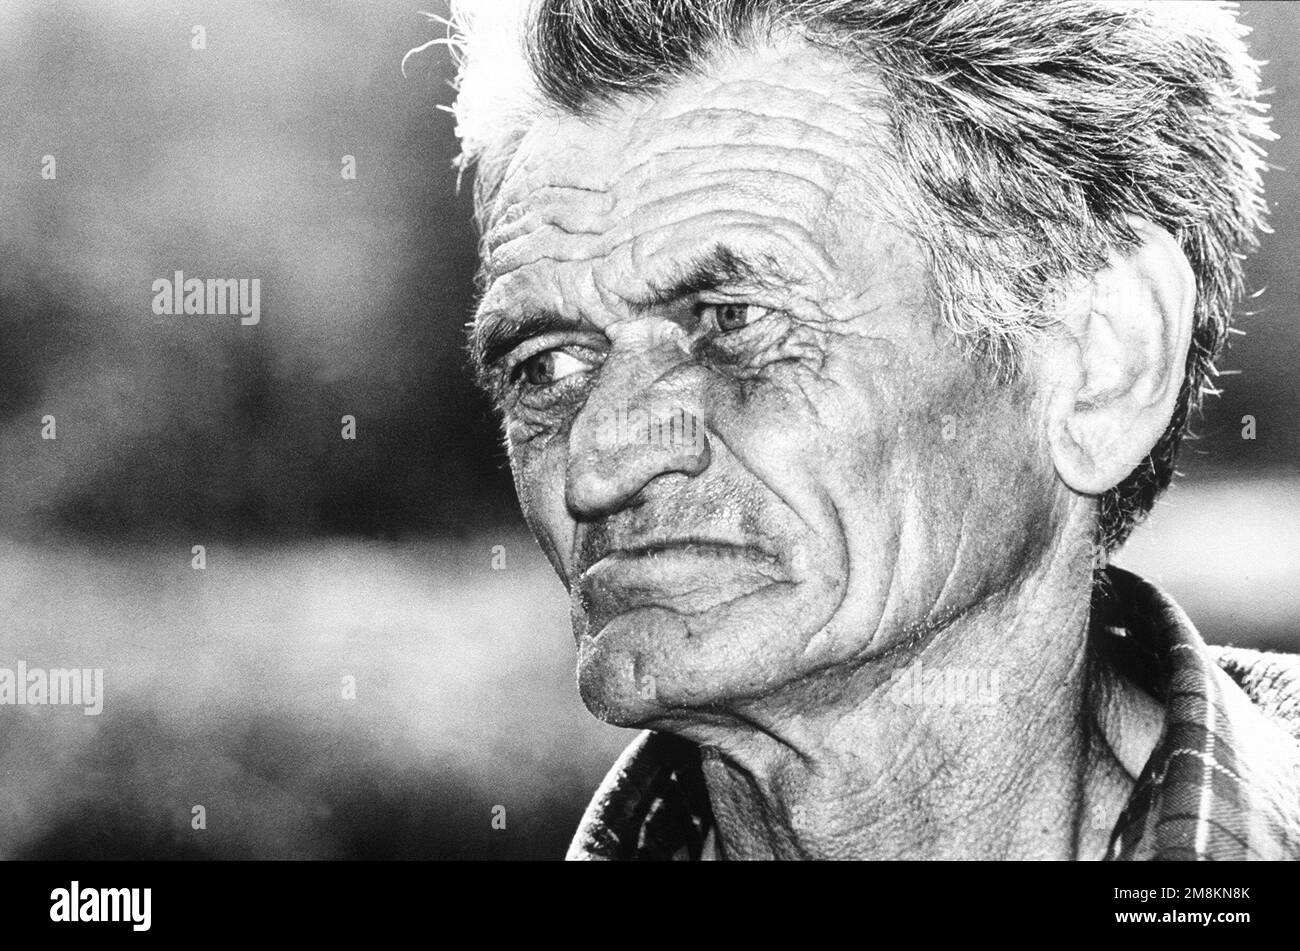 Military Photographer of the Year Winner 1996 Title: Too Many Years Category: Portfolio Brief Description: A close up of an old man with deep wrinkles. (black & white ) Exact Date Shot Unknown. Country: Unknown Stock Photo